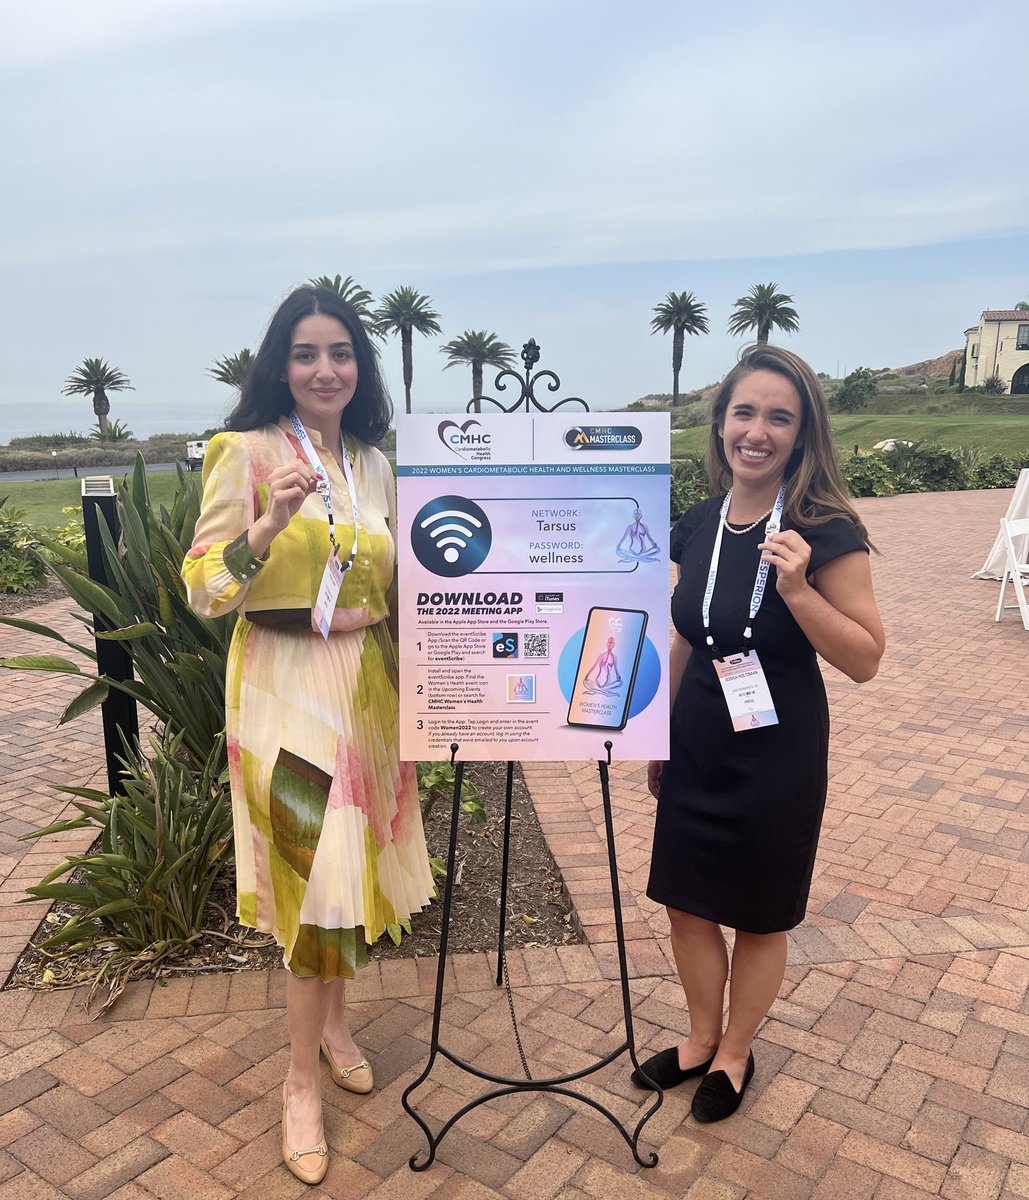 @jholtzman3 and I are excited to share with you our @CMHC_CME 2022 Women’s Cardiometabolic Health and Wellness Master Class experience and knowledge!!

Follow us and #CMHCWomensMC for live experience 🫀
@CardioNerds